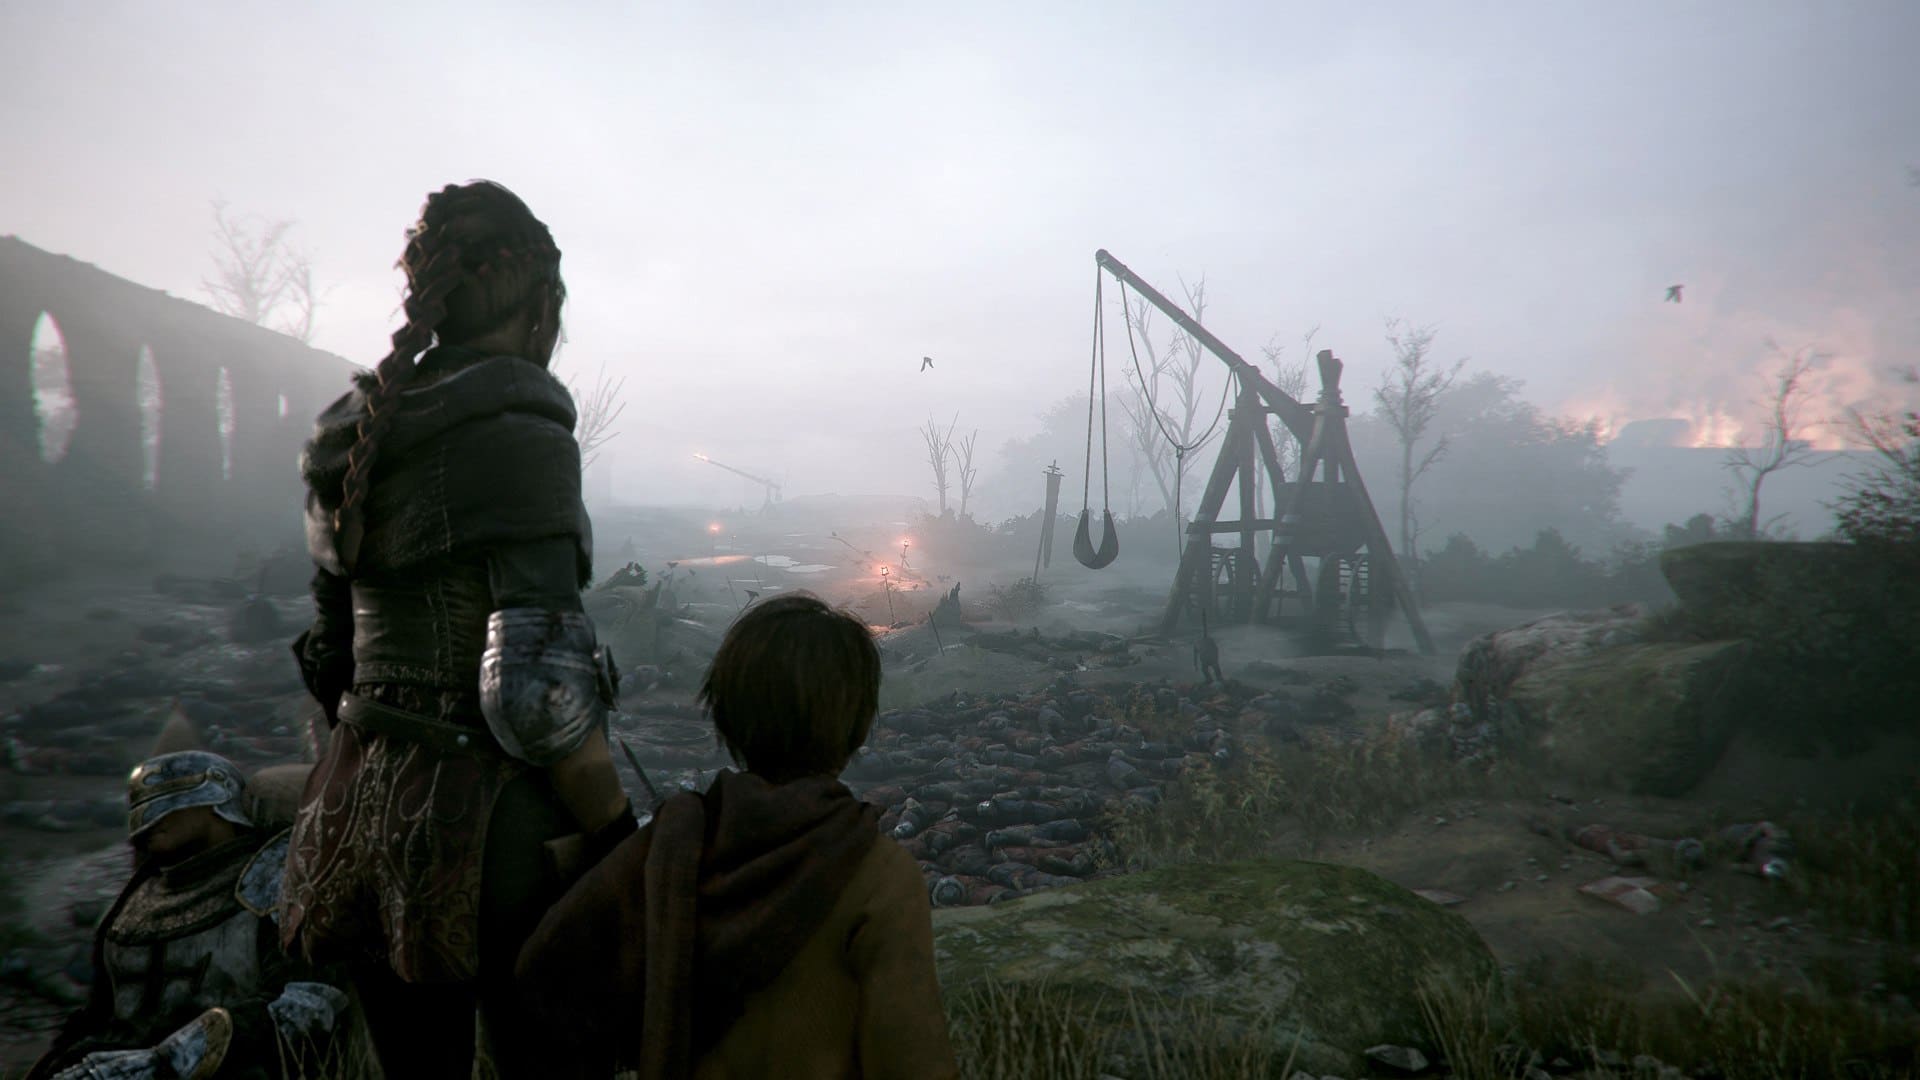 This Custom Xbox For A Plague Tale Looks Really Awesome - GameSpot